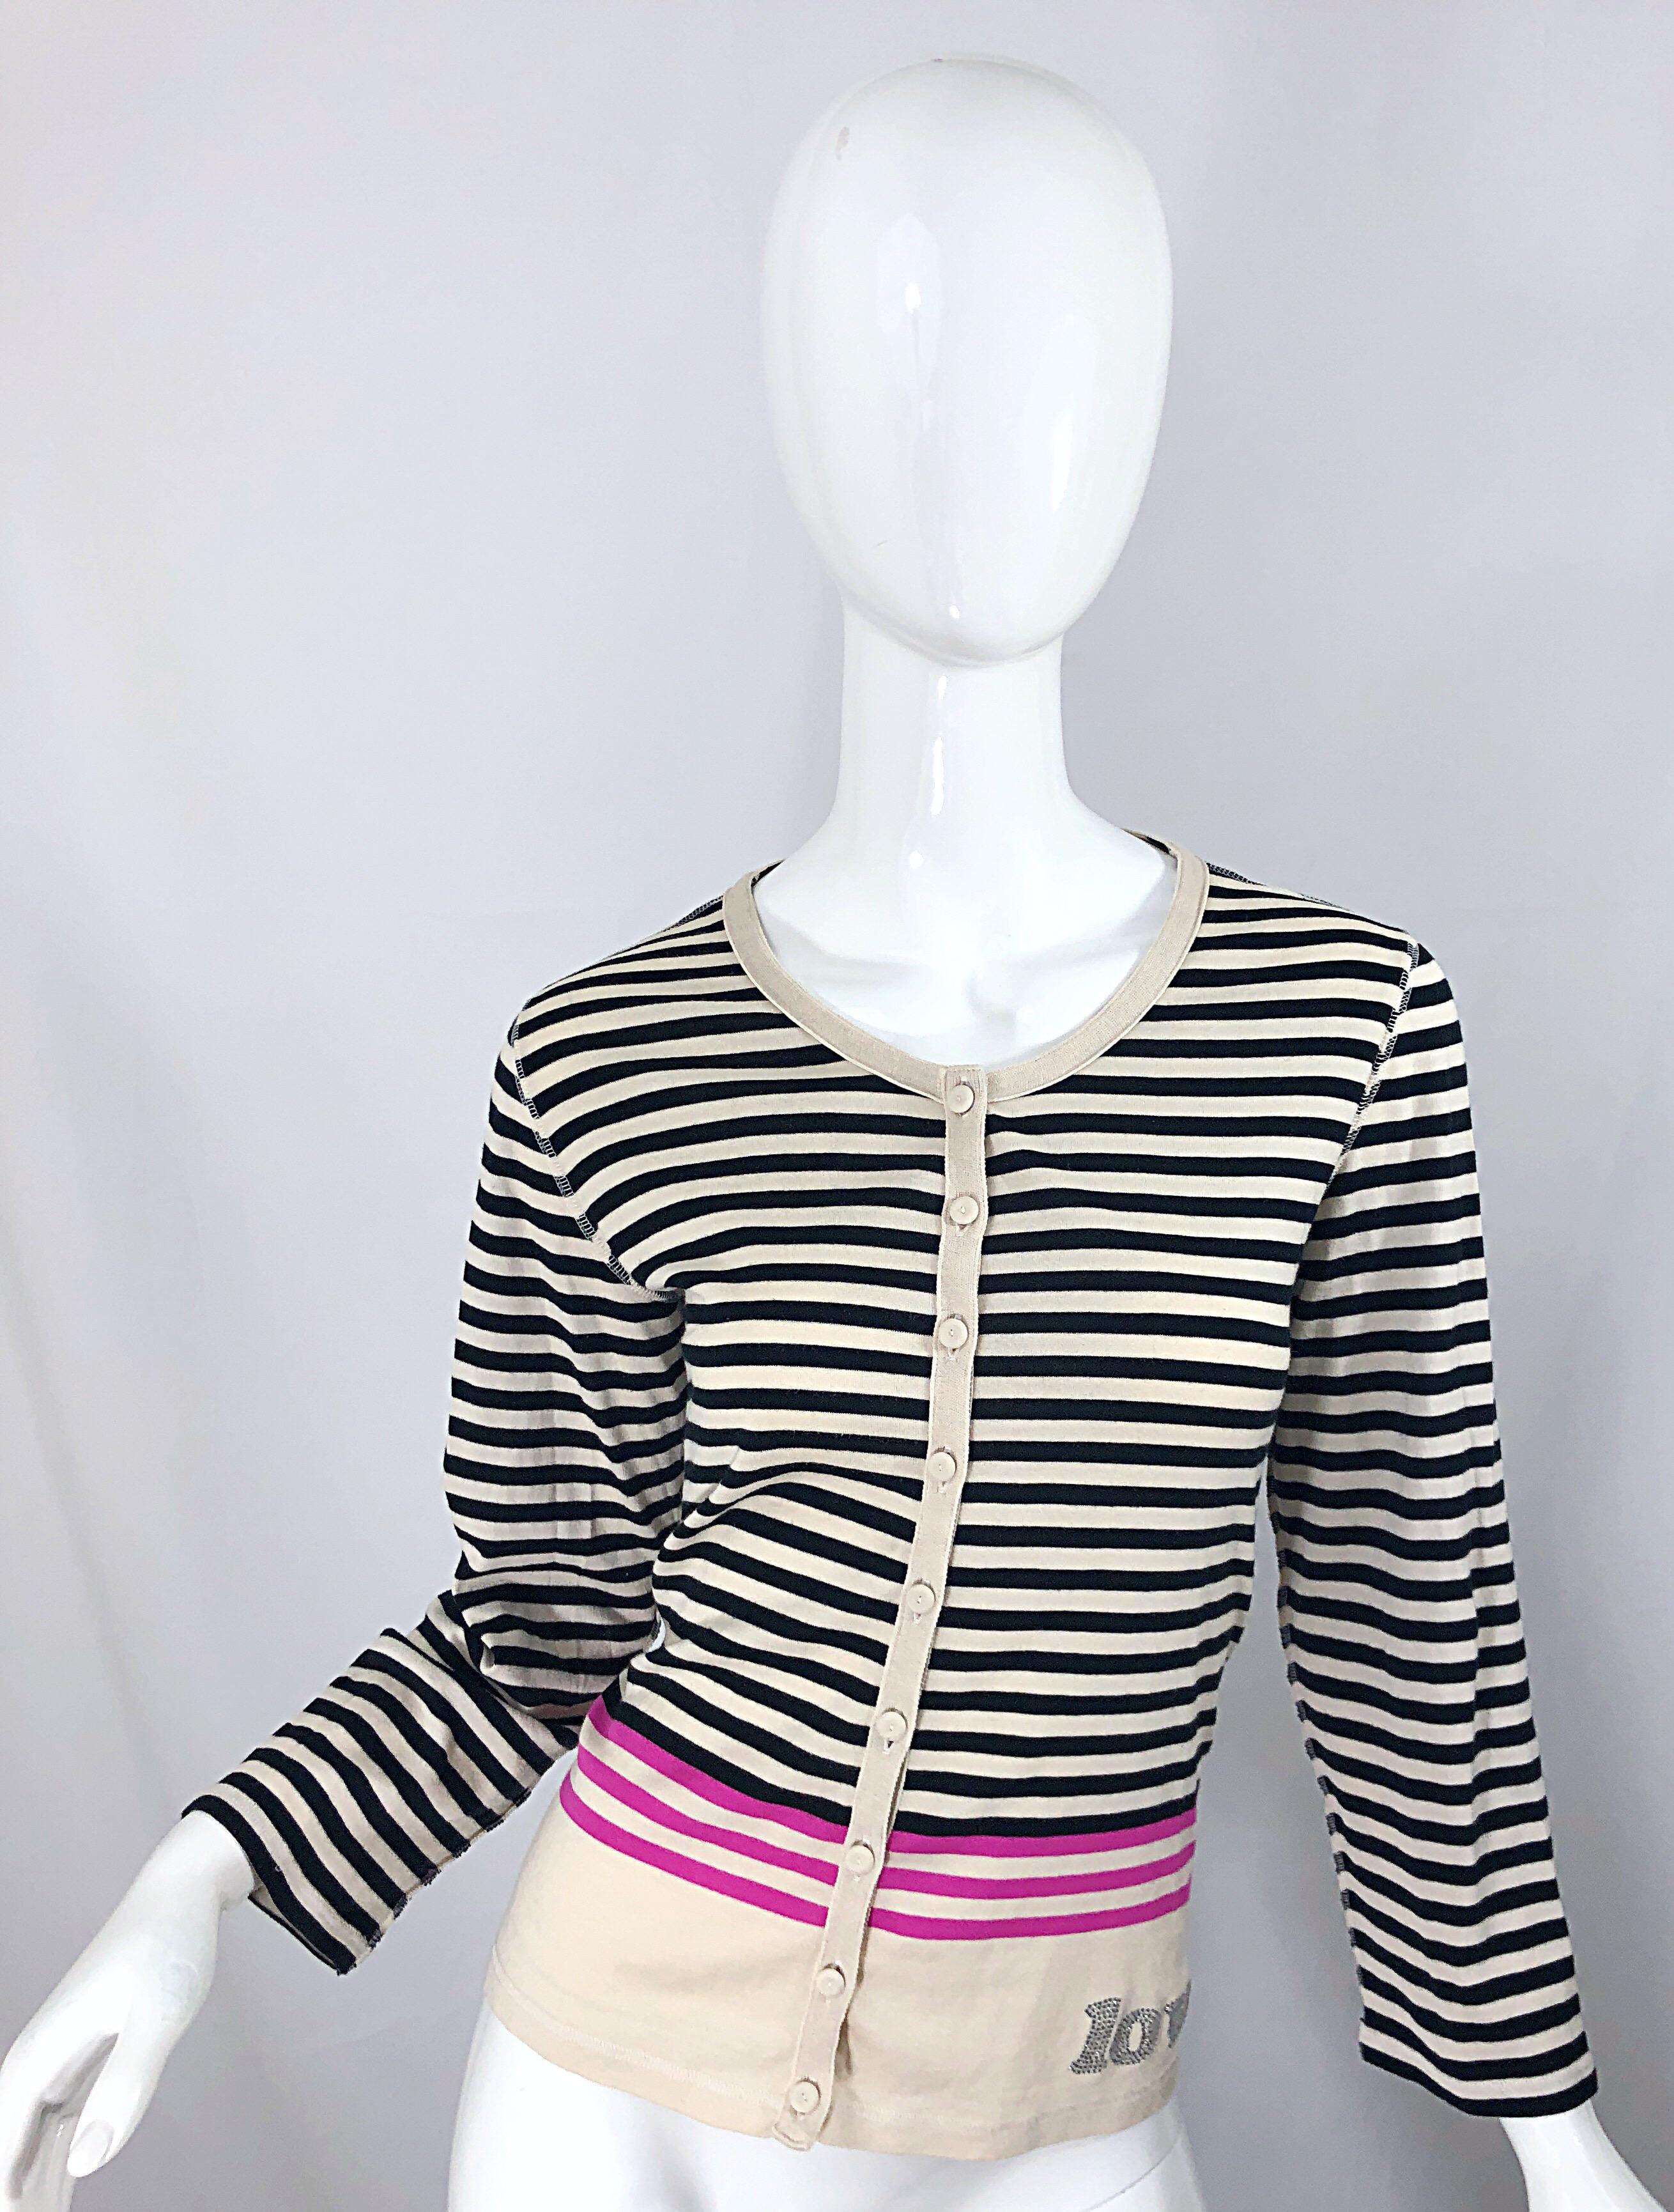 Chic 90s SONIA RYKIEL black, ivory and bubblegum pink rhinestone encrusted 'LOVE' cardigan top! Buttons of the front, with the word, LOVE encrusted in rhinestones at left waist. Small rhinestone encrusted 